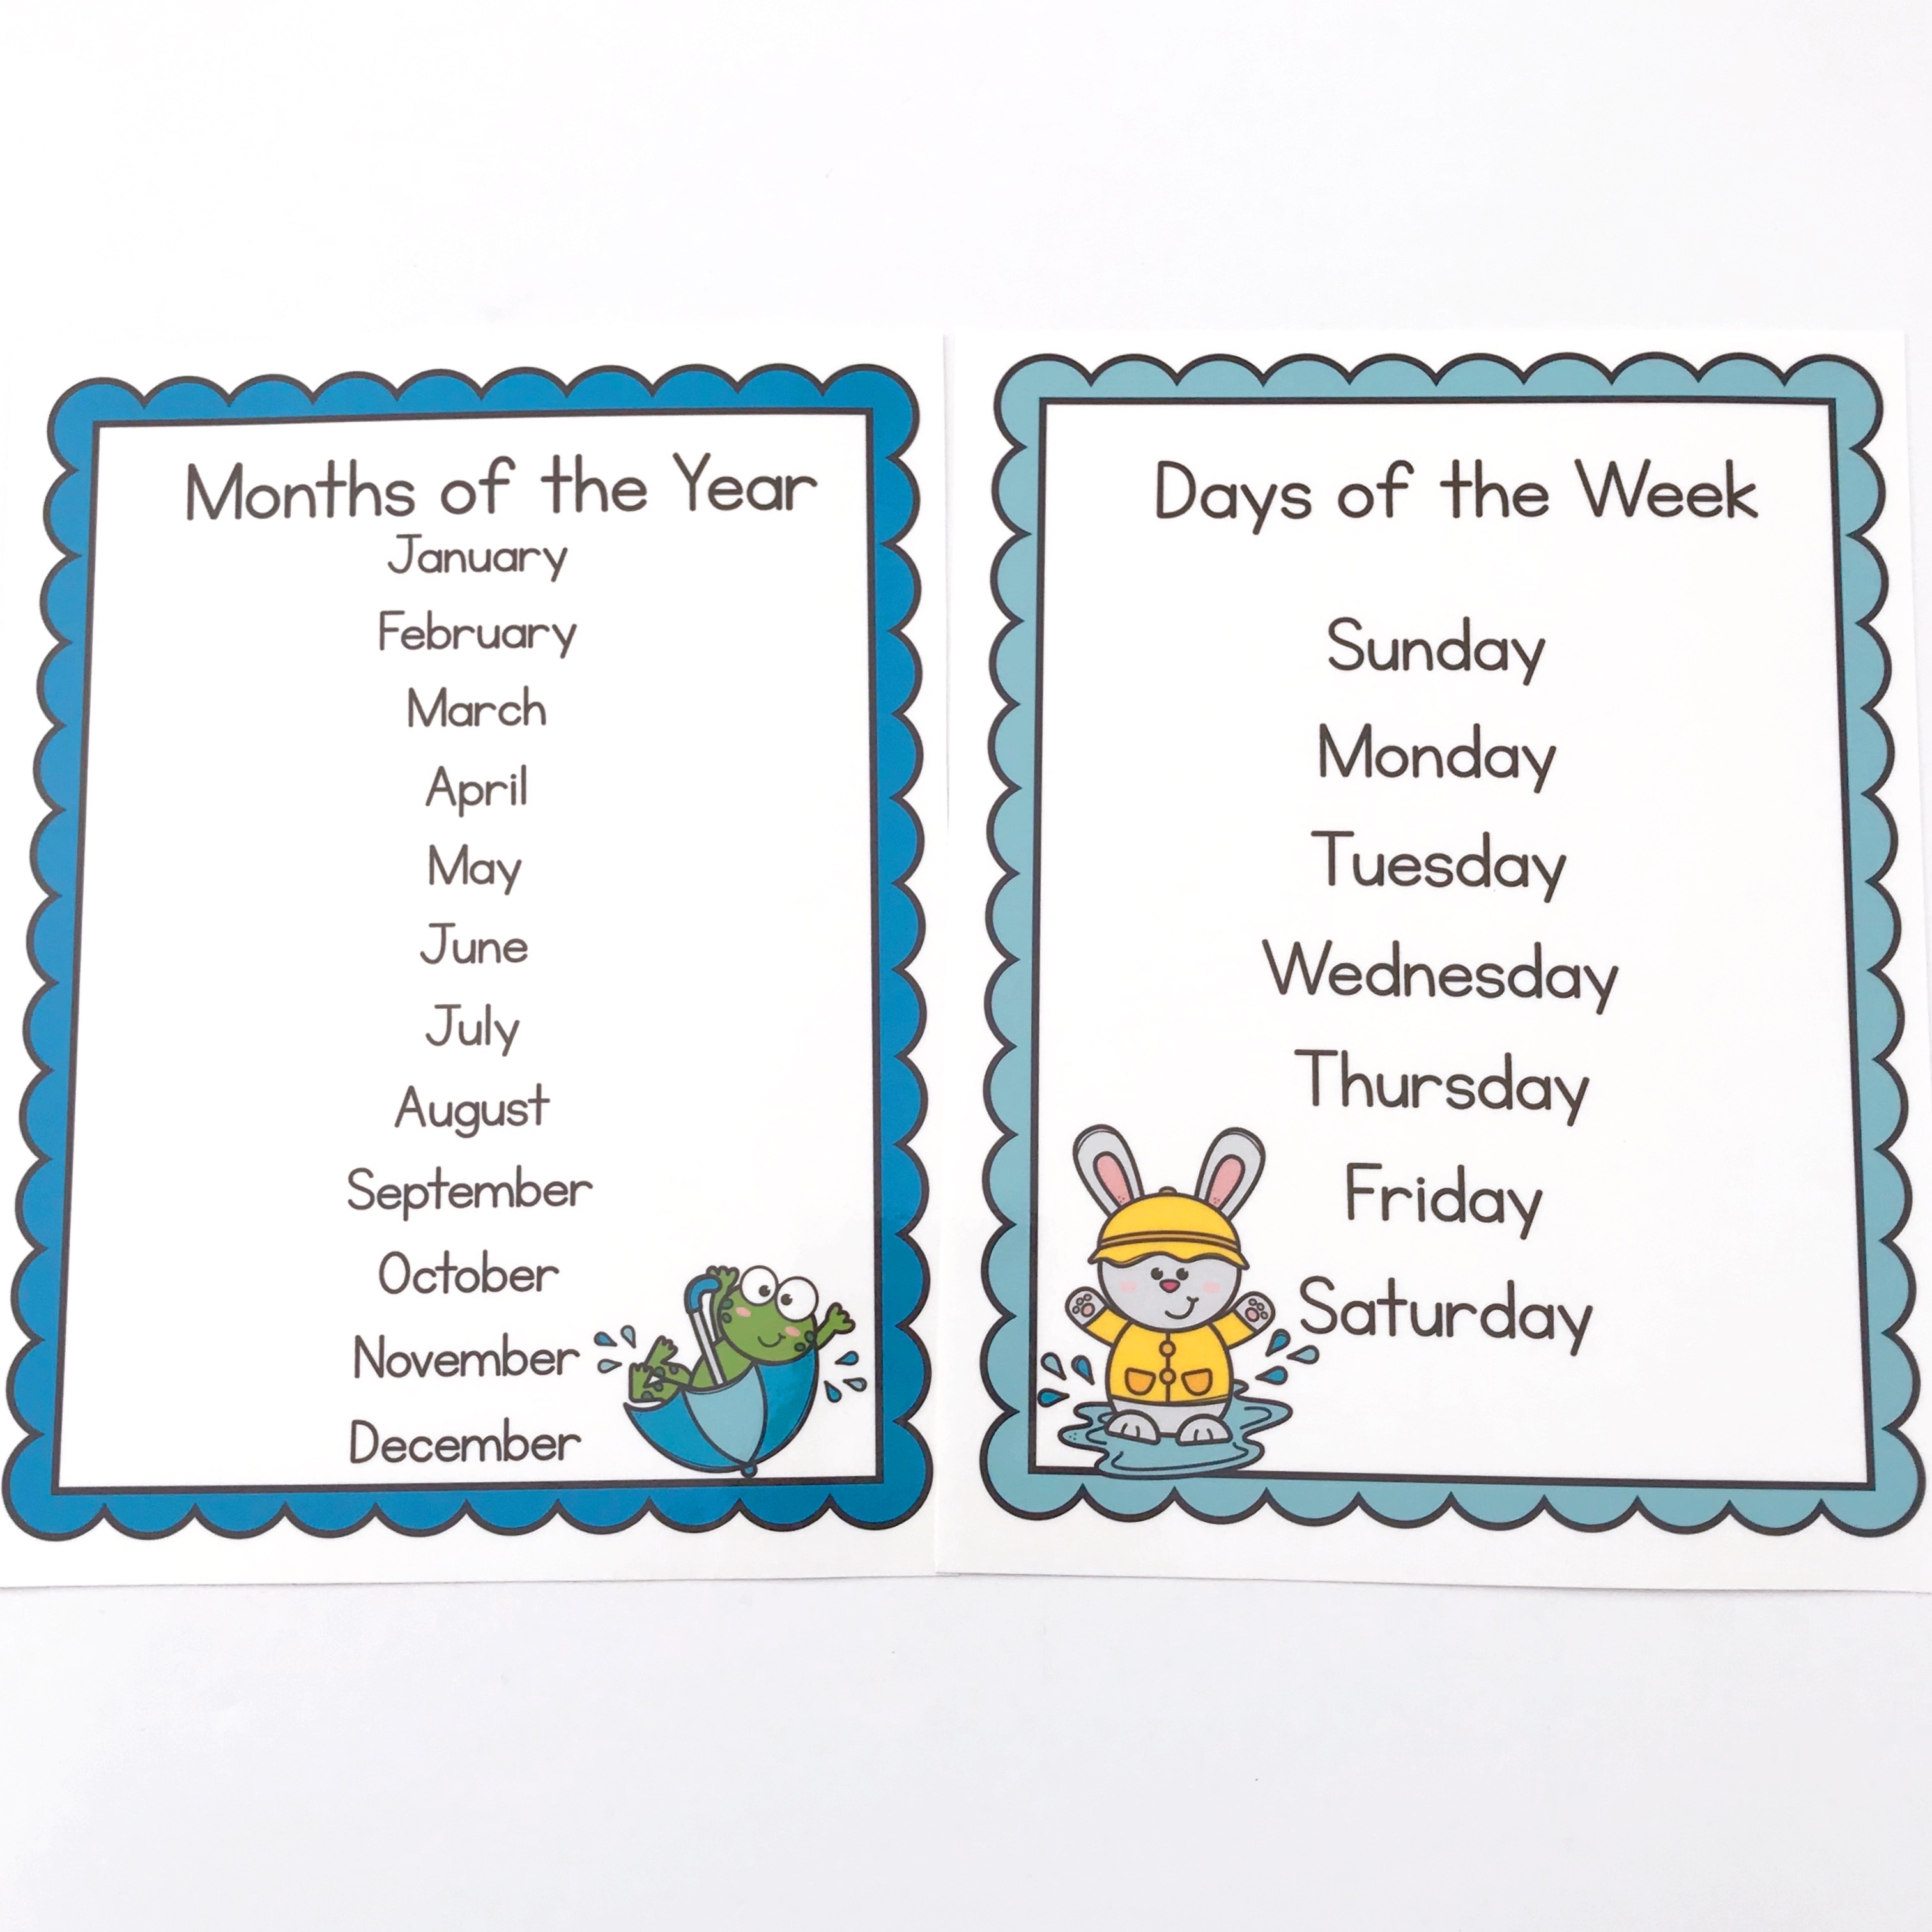 April Preschool Fun - Days of the week and months of the year posters